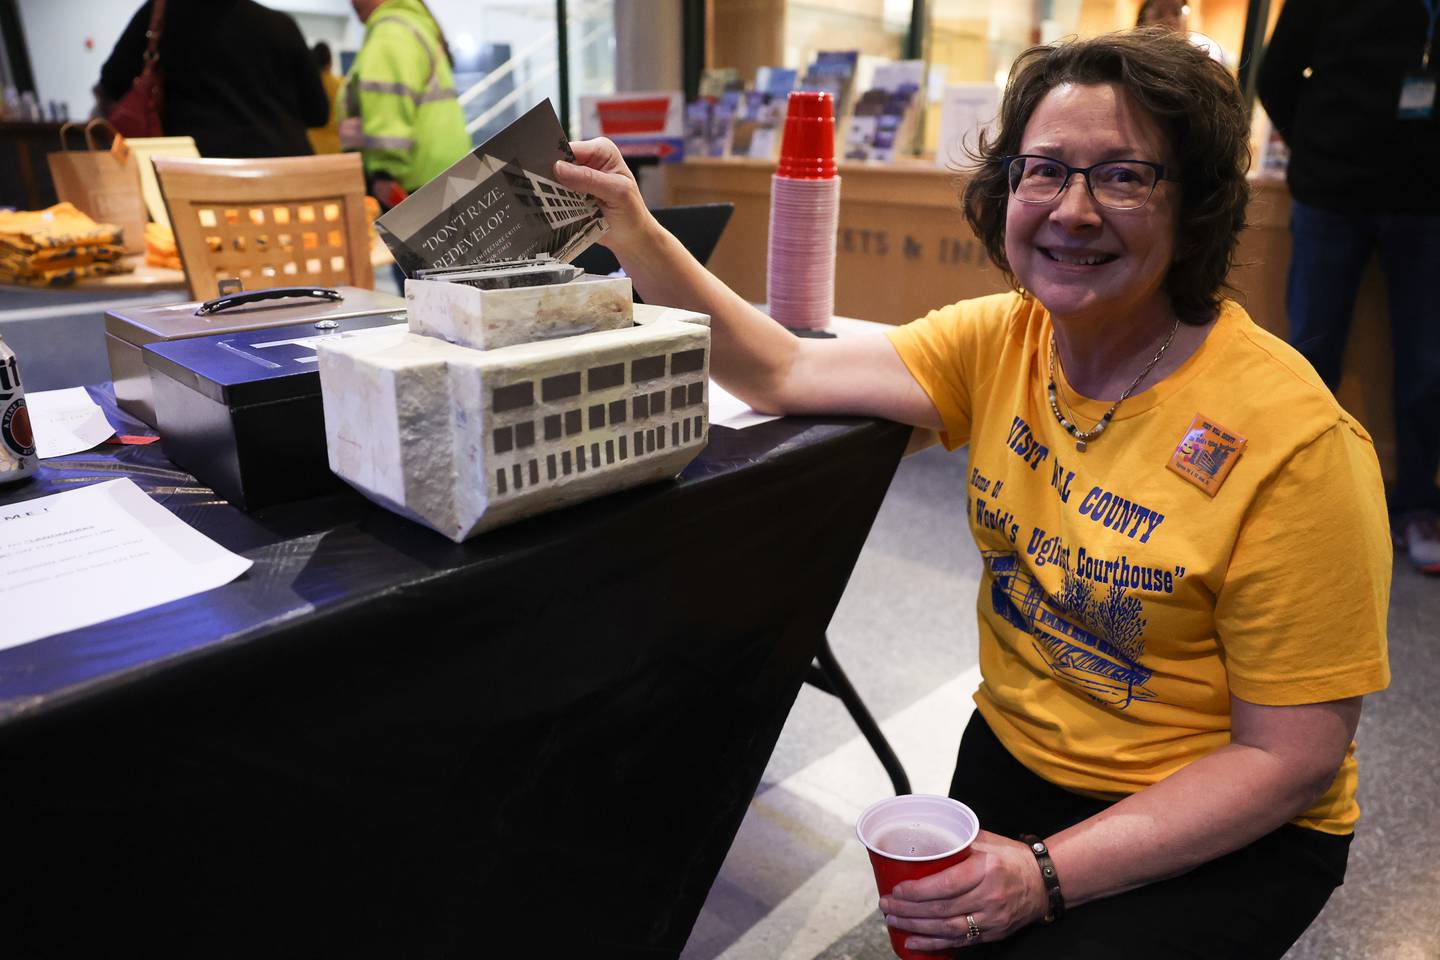 Mary Lynn Maloney poses with her sculpture of the old Will County Courthouse at a kegger fundraiser to save the old courthouse at the Joliet Area Historical Museum on Friday, February 3rd.